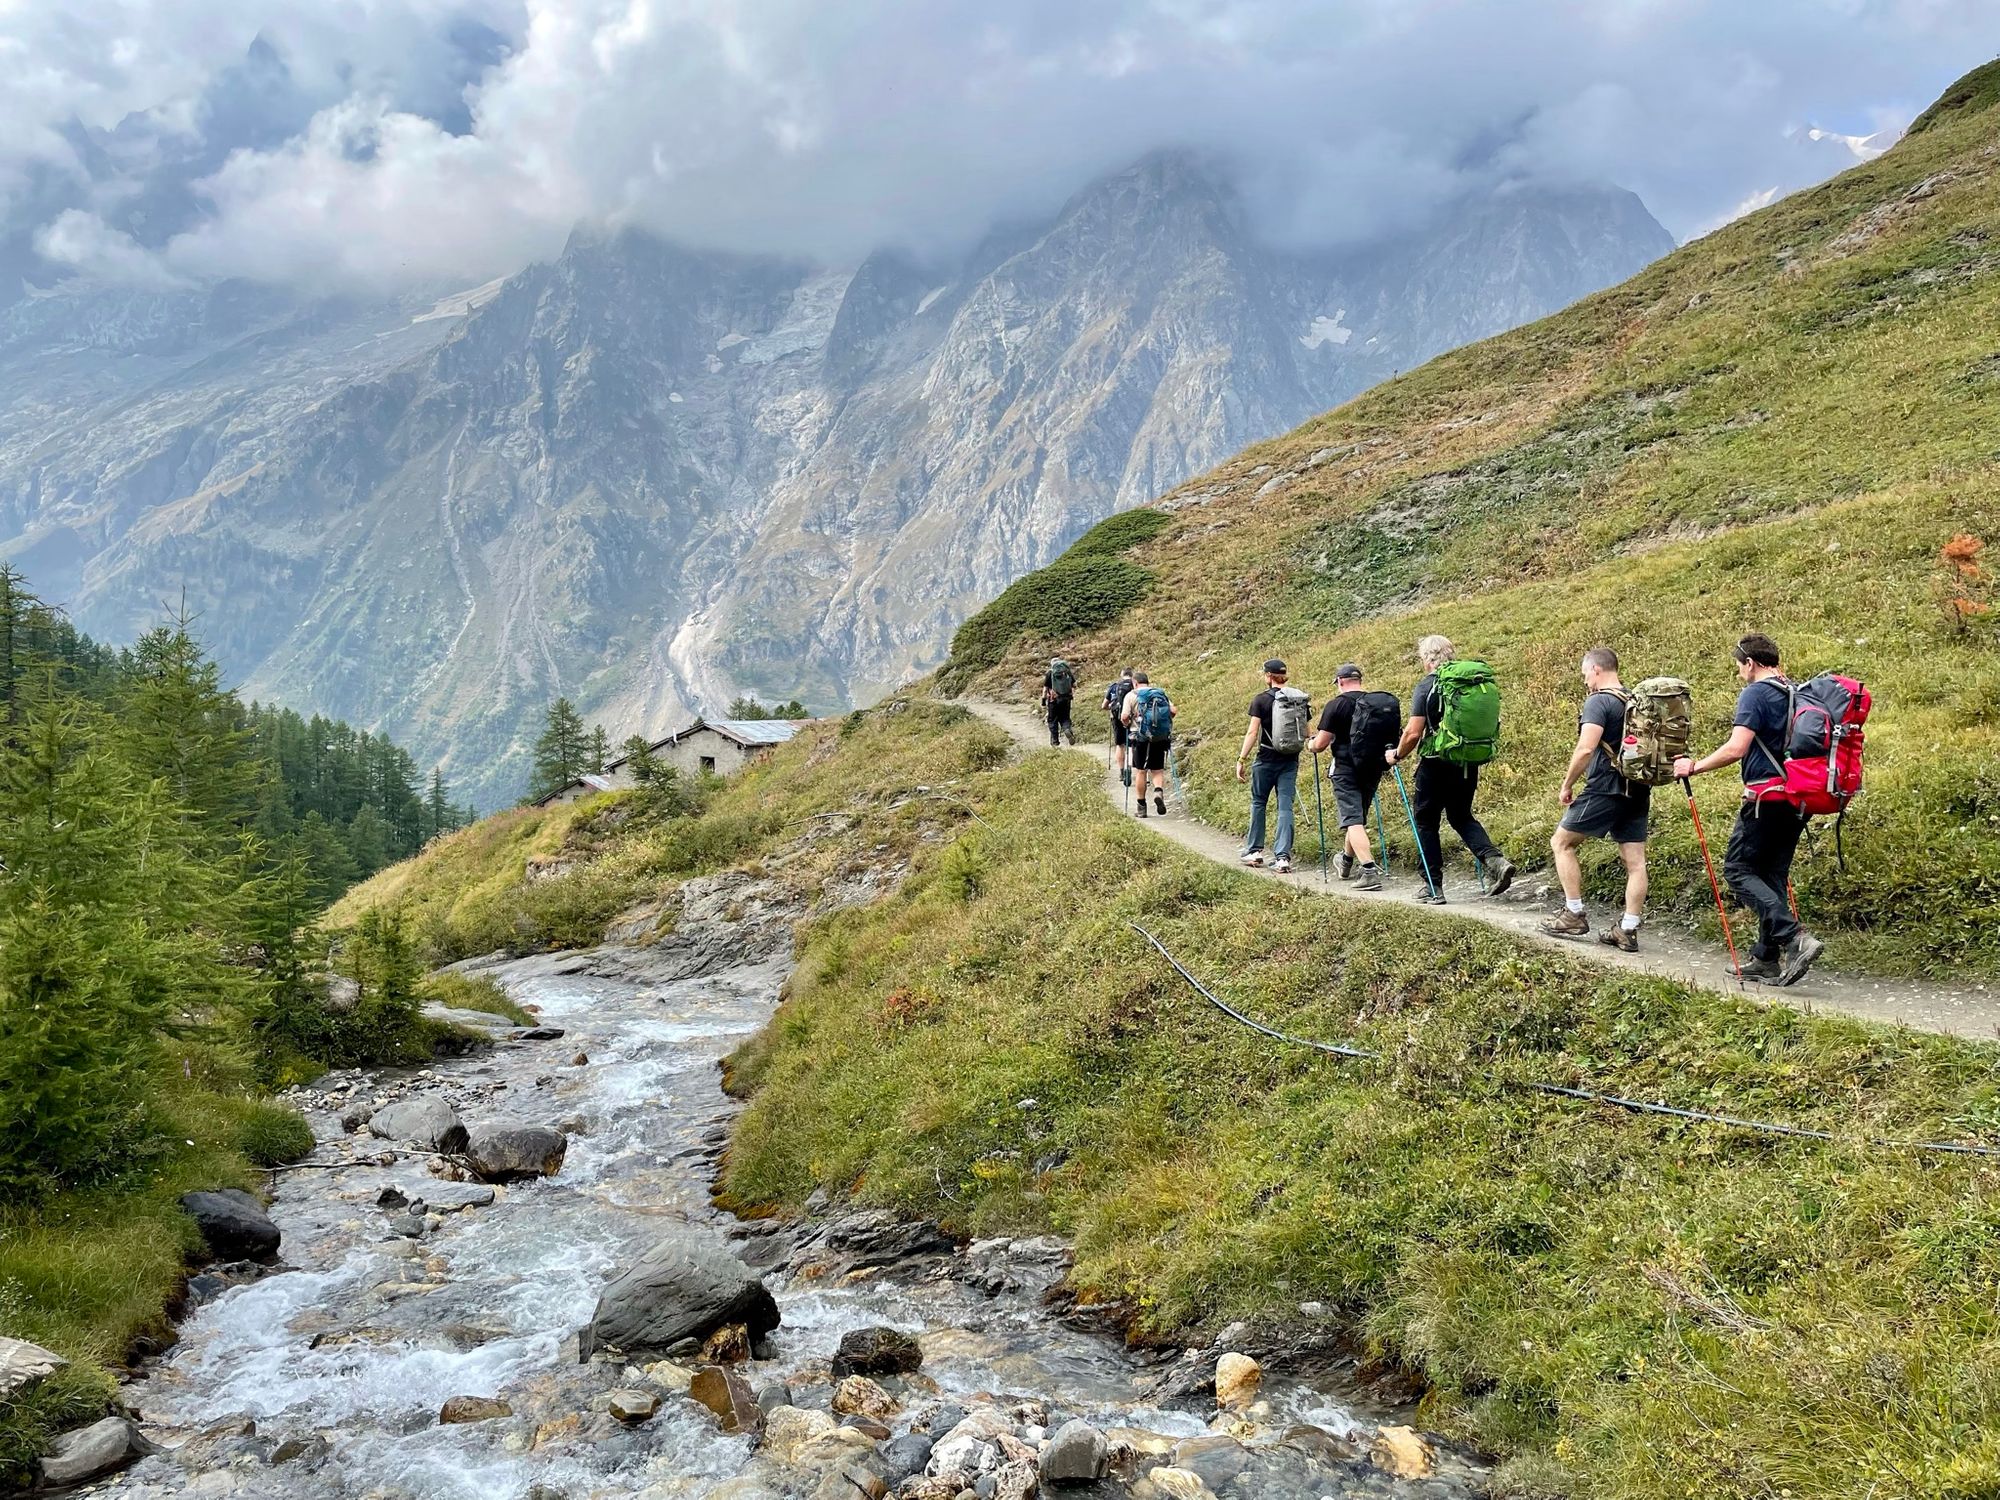 Hikers on the Mont Blanc trail. Photo: Tim Wells